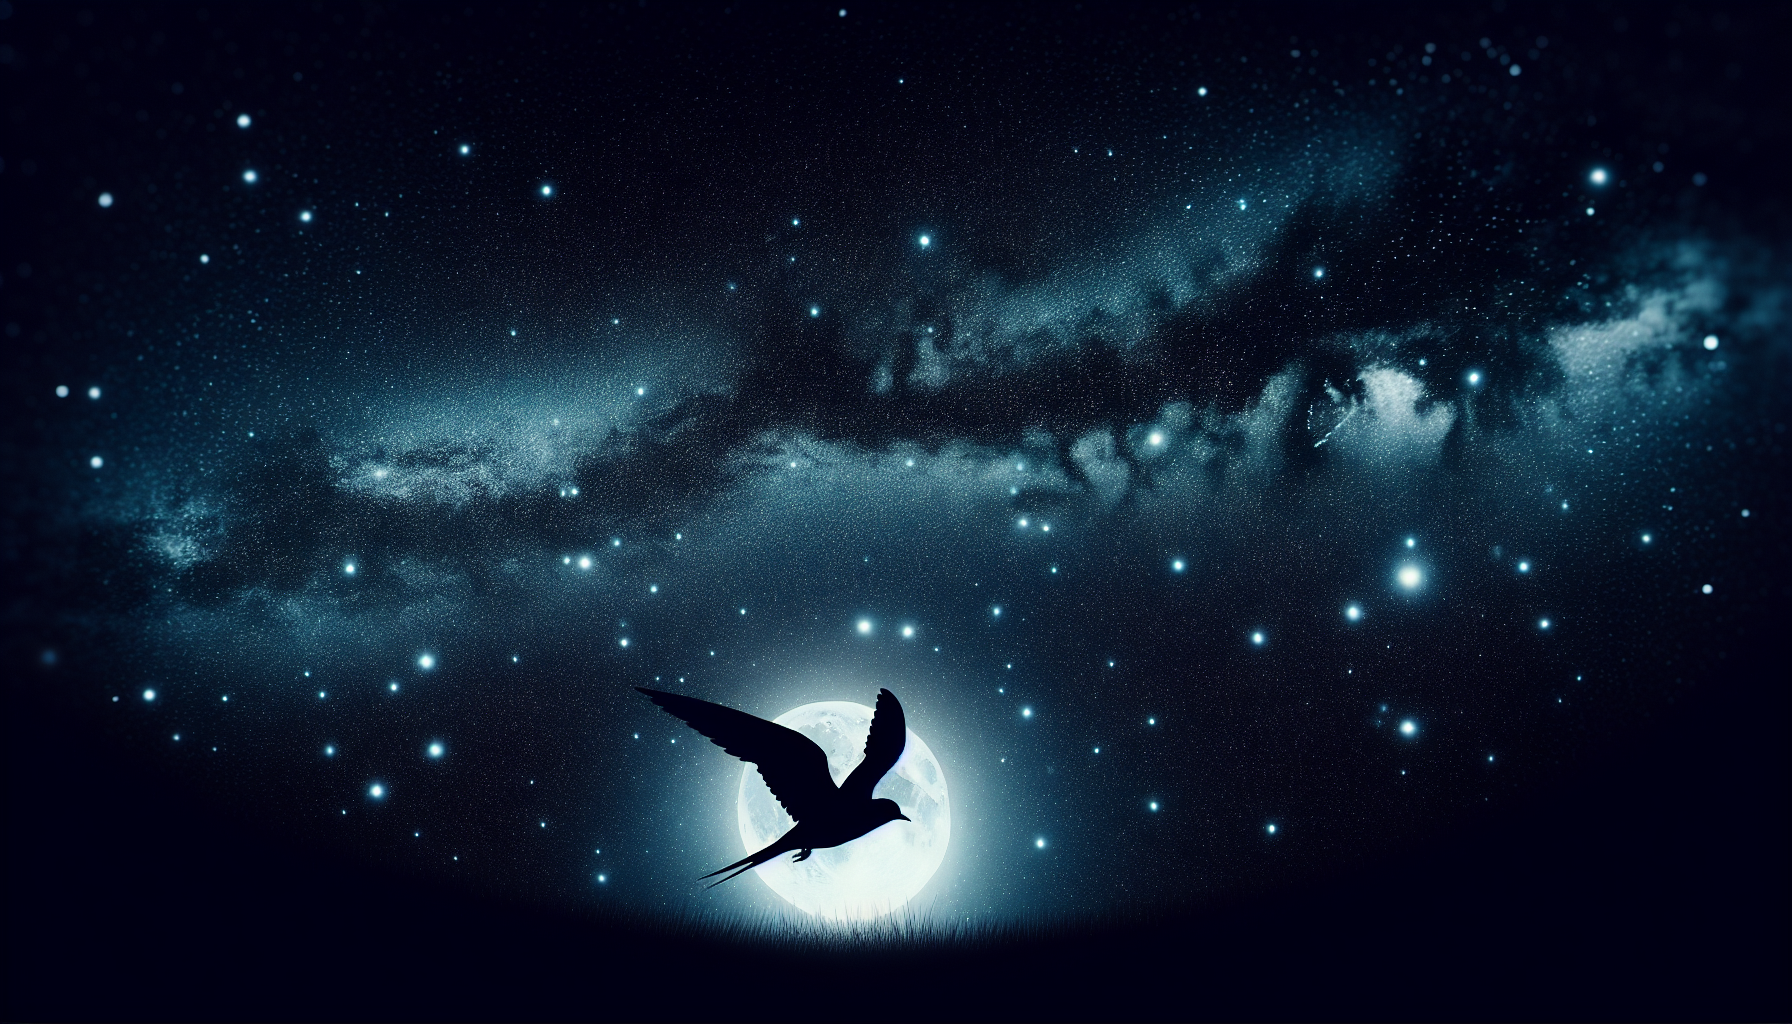 What Birds Migrate At Night?